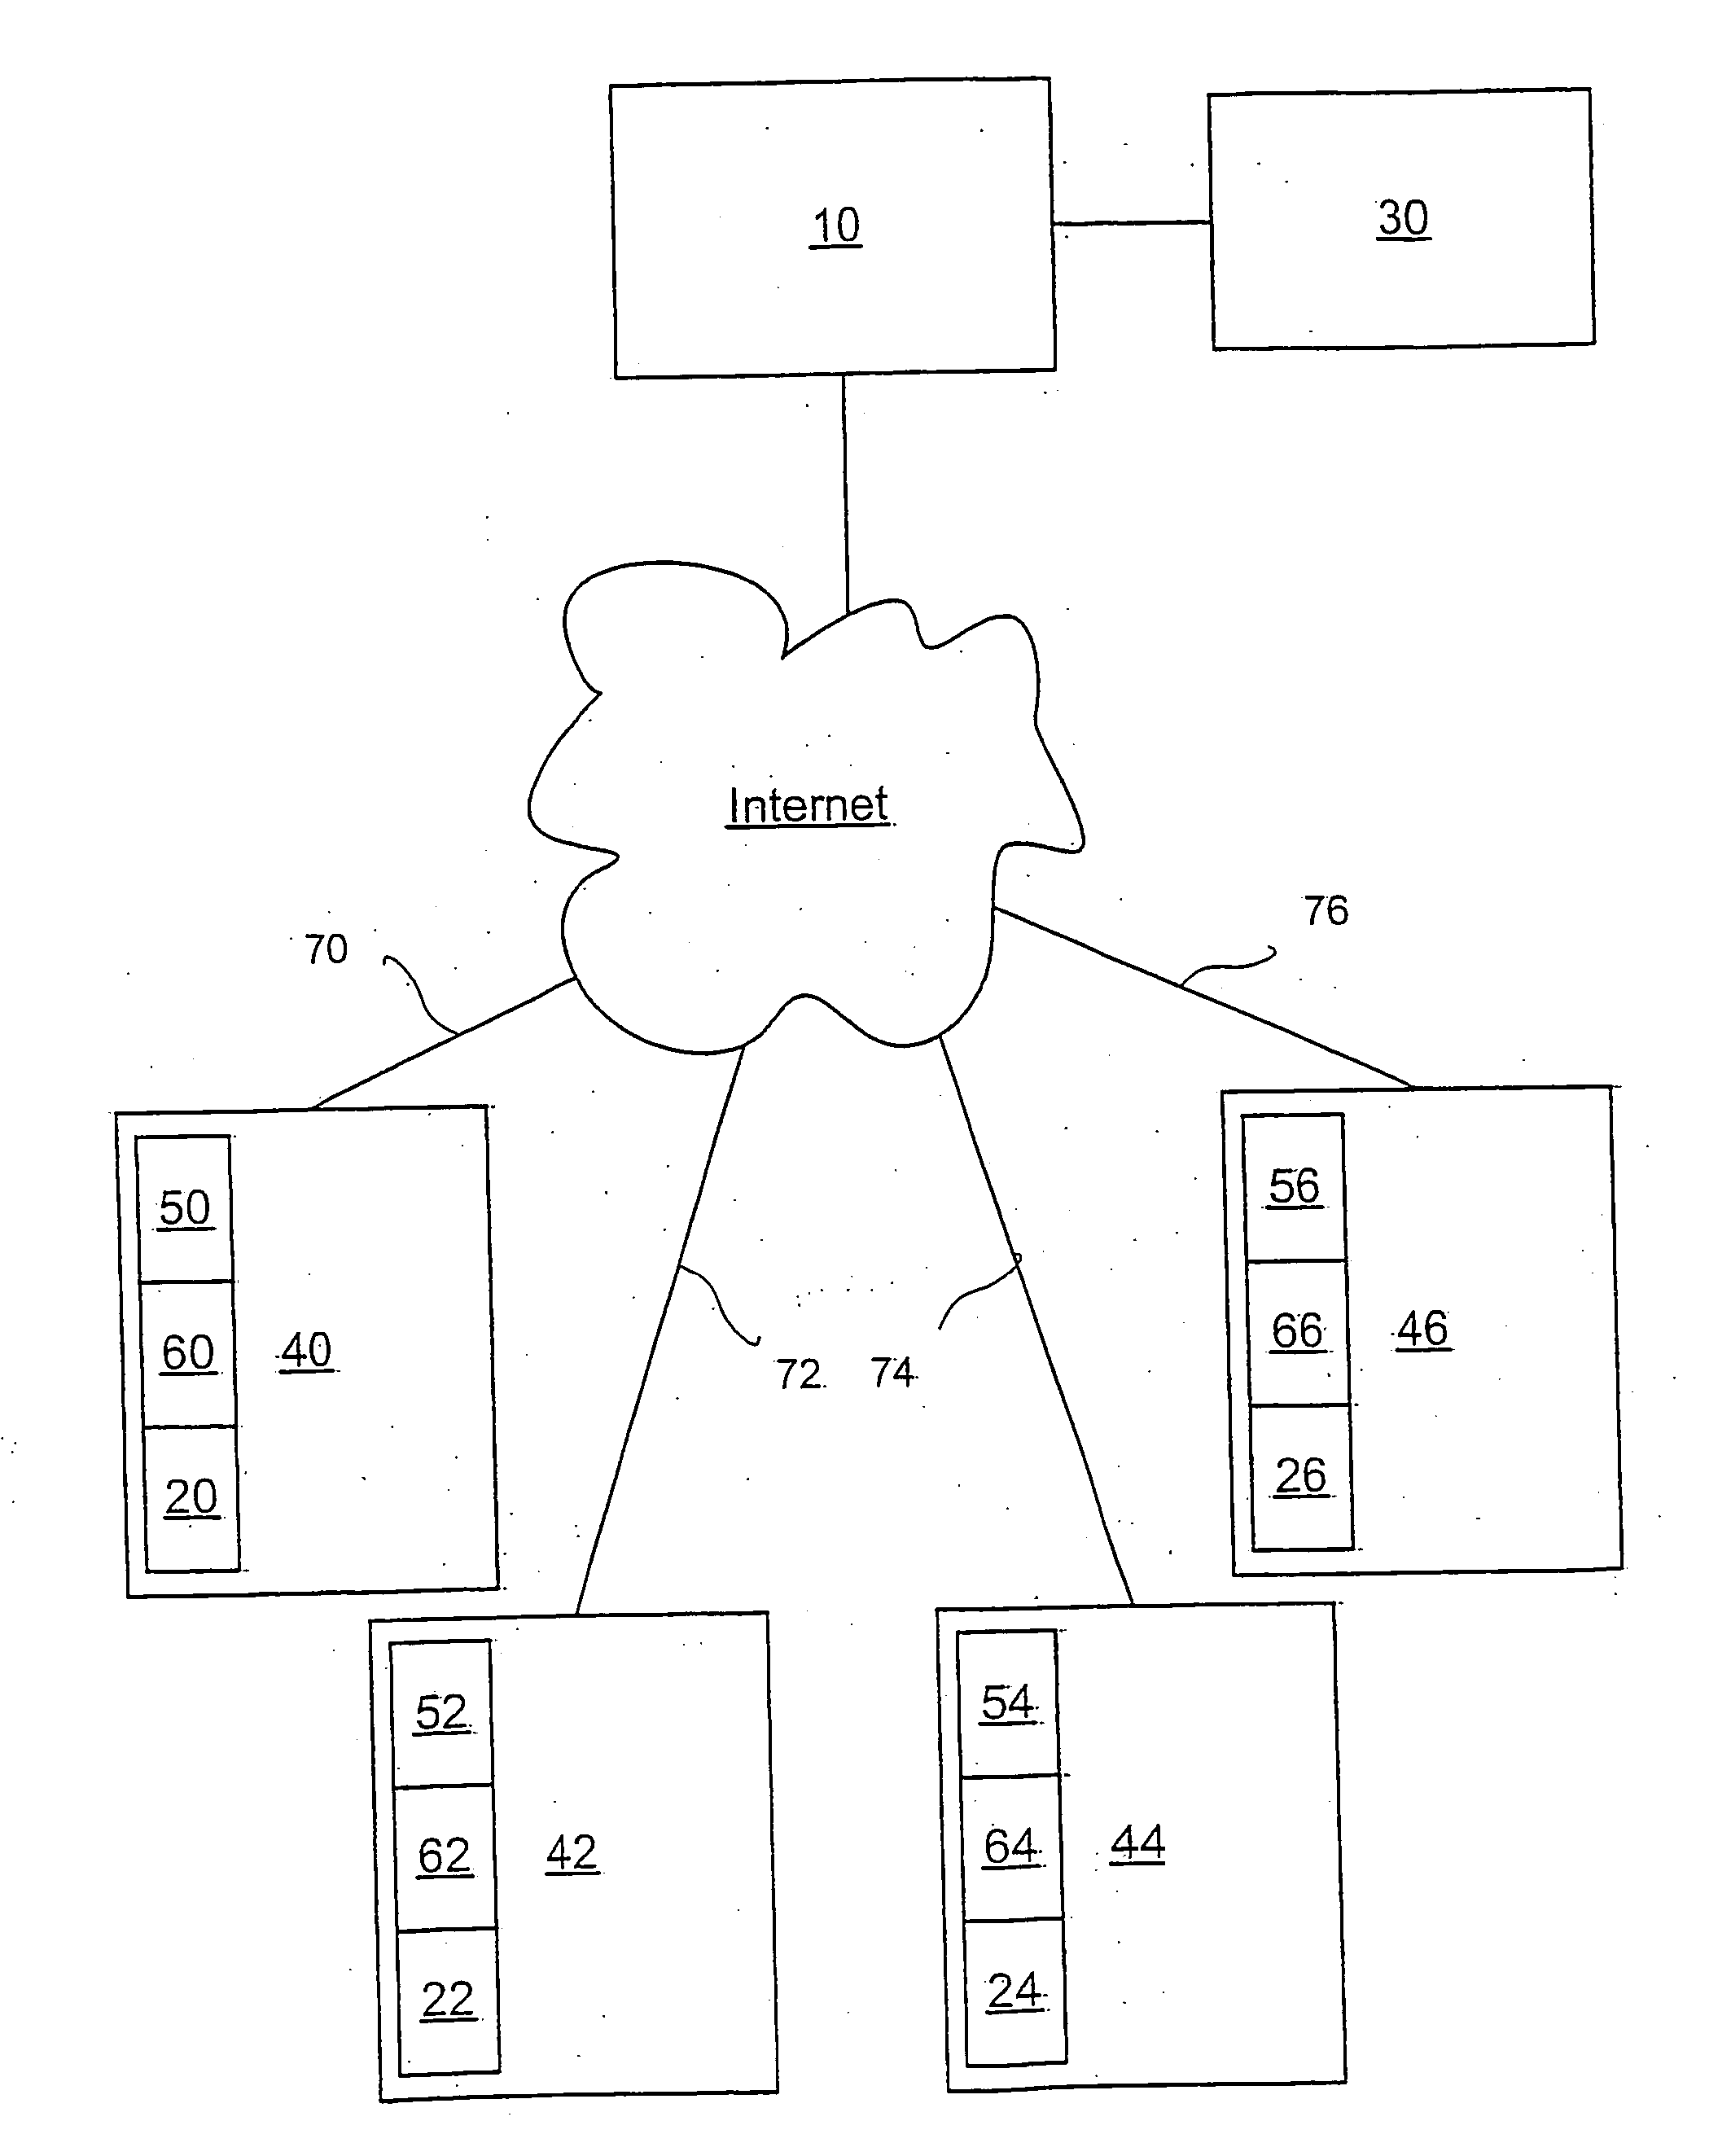 Apparatus and method for adaptive data transmission